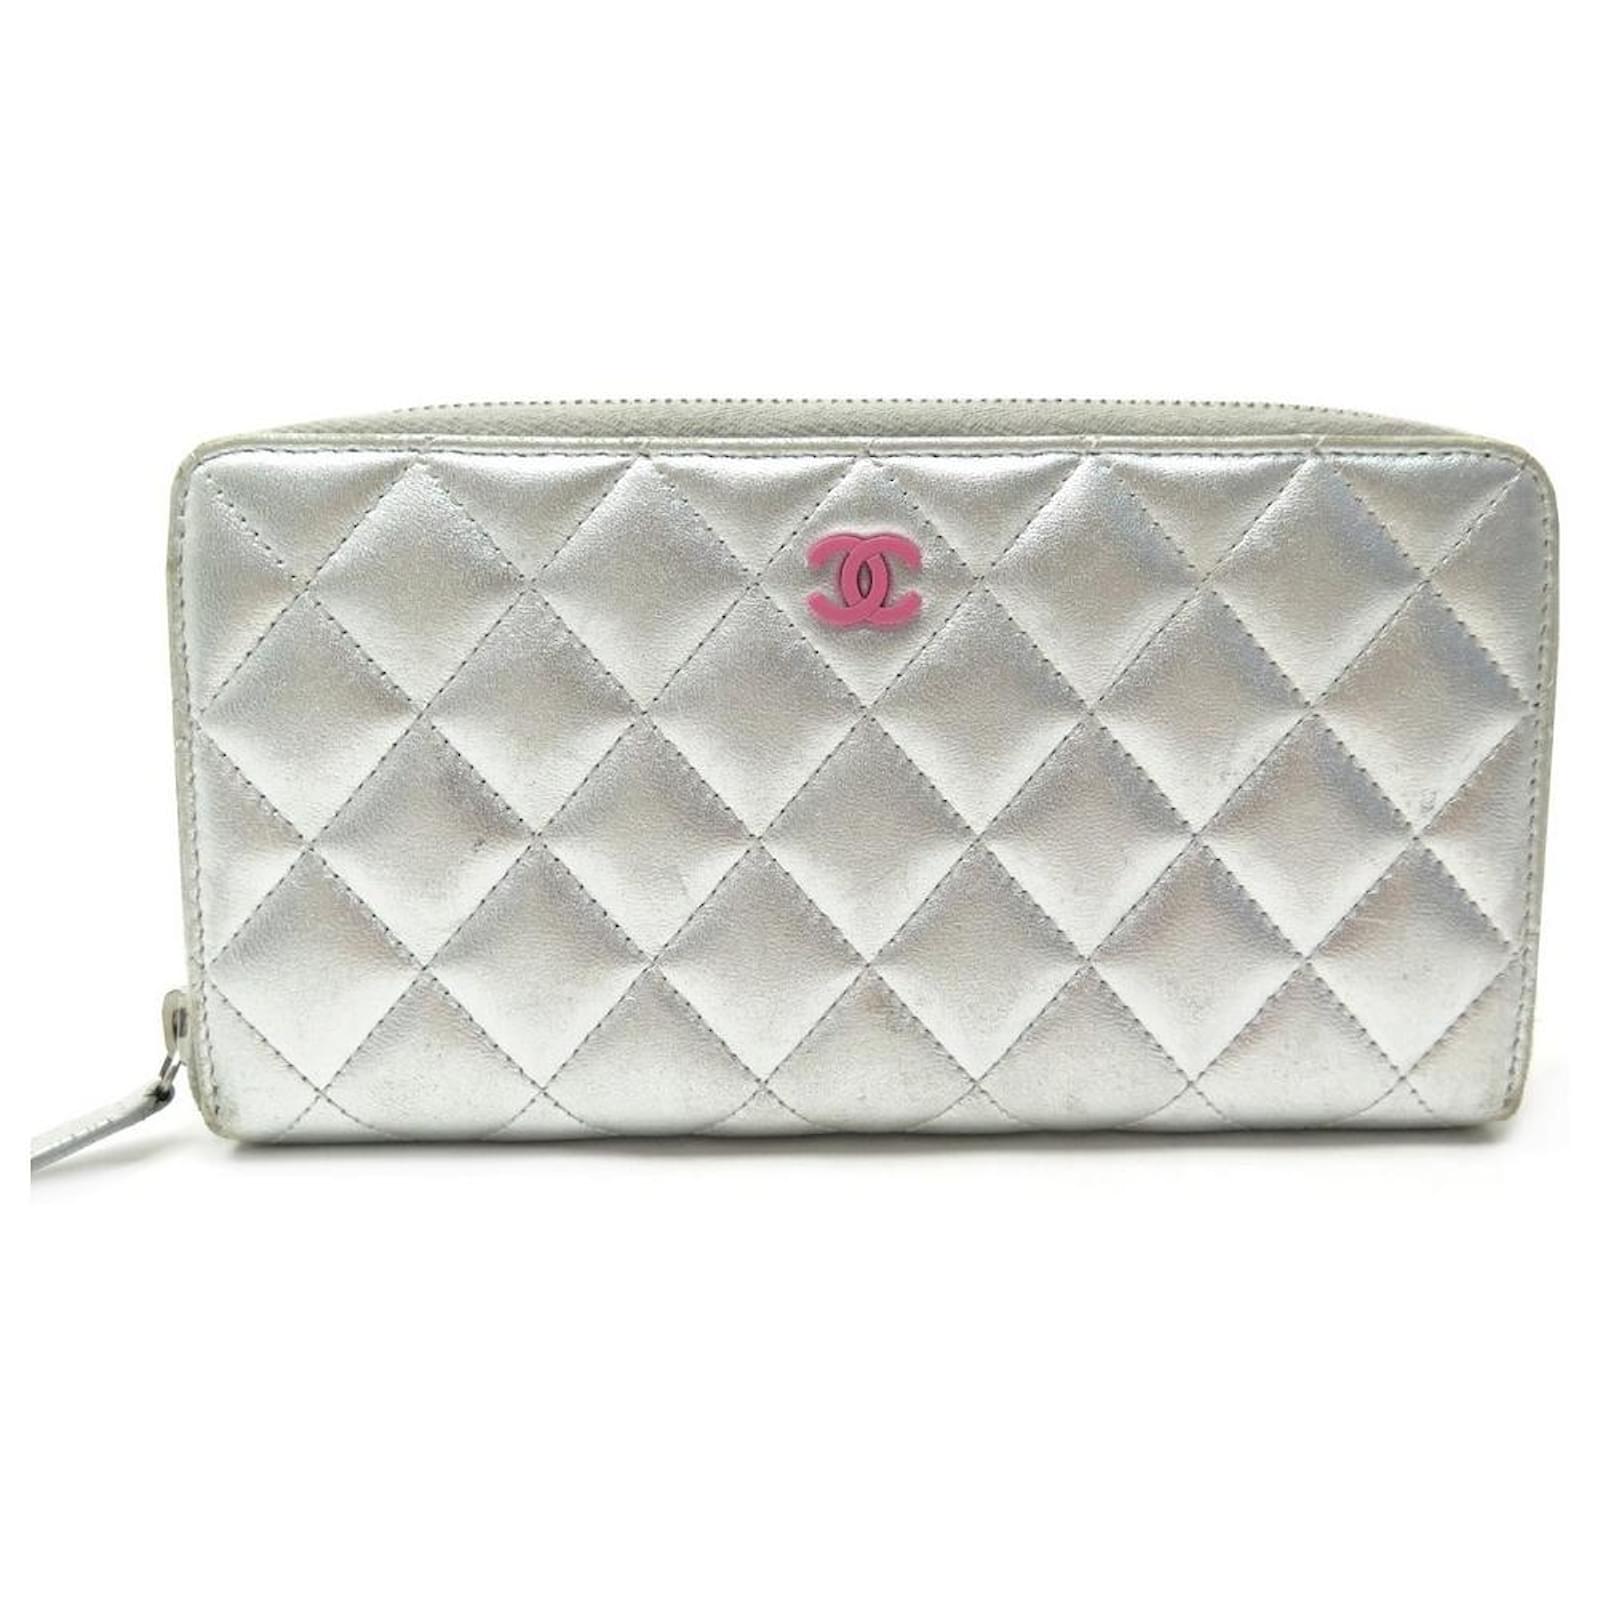 New Chanel Classic Zipped Card Holder - COME BAG BRANDNAME